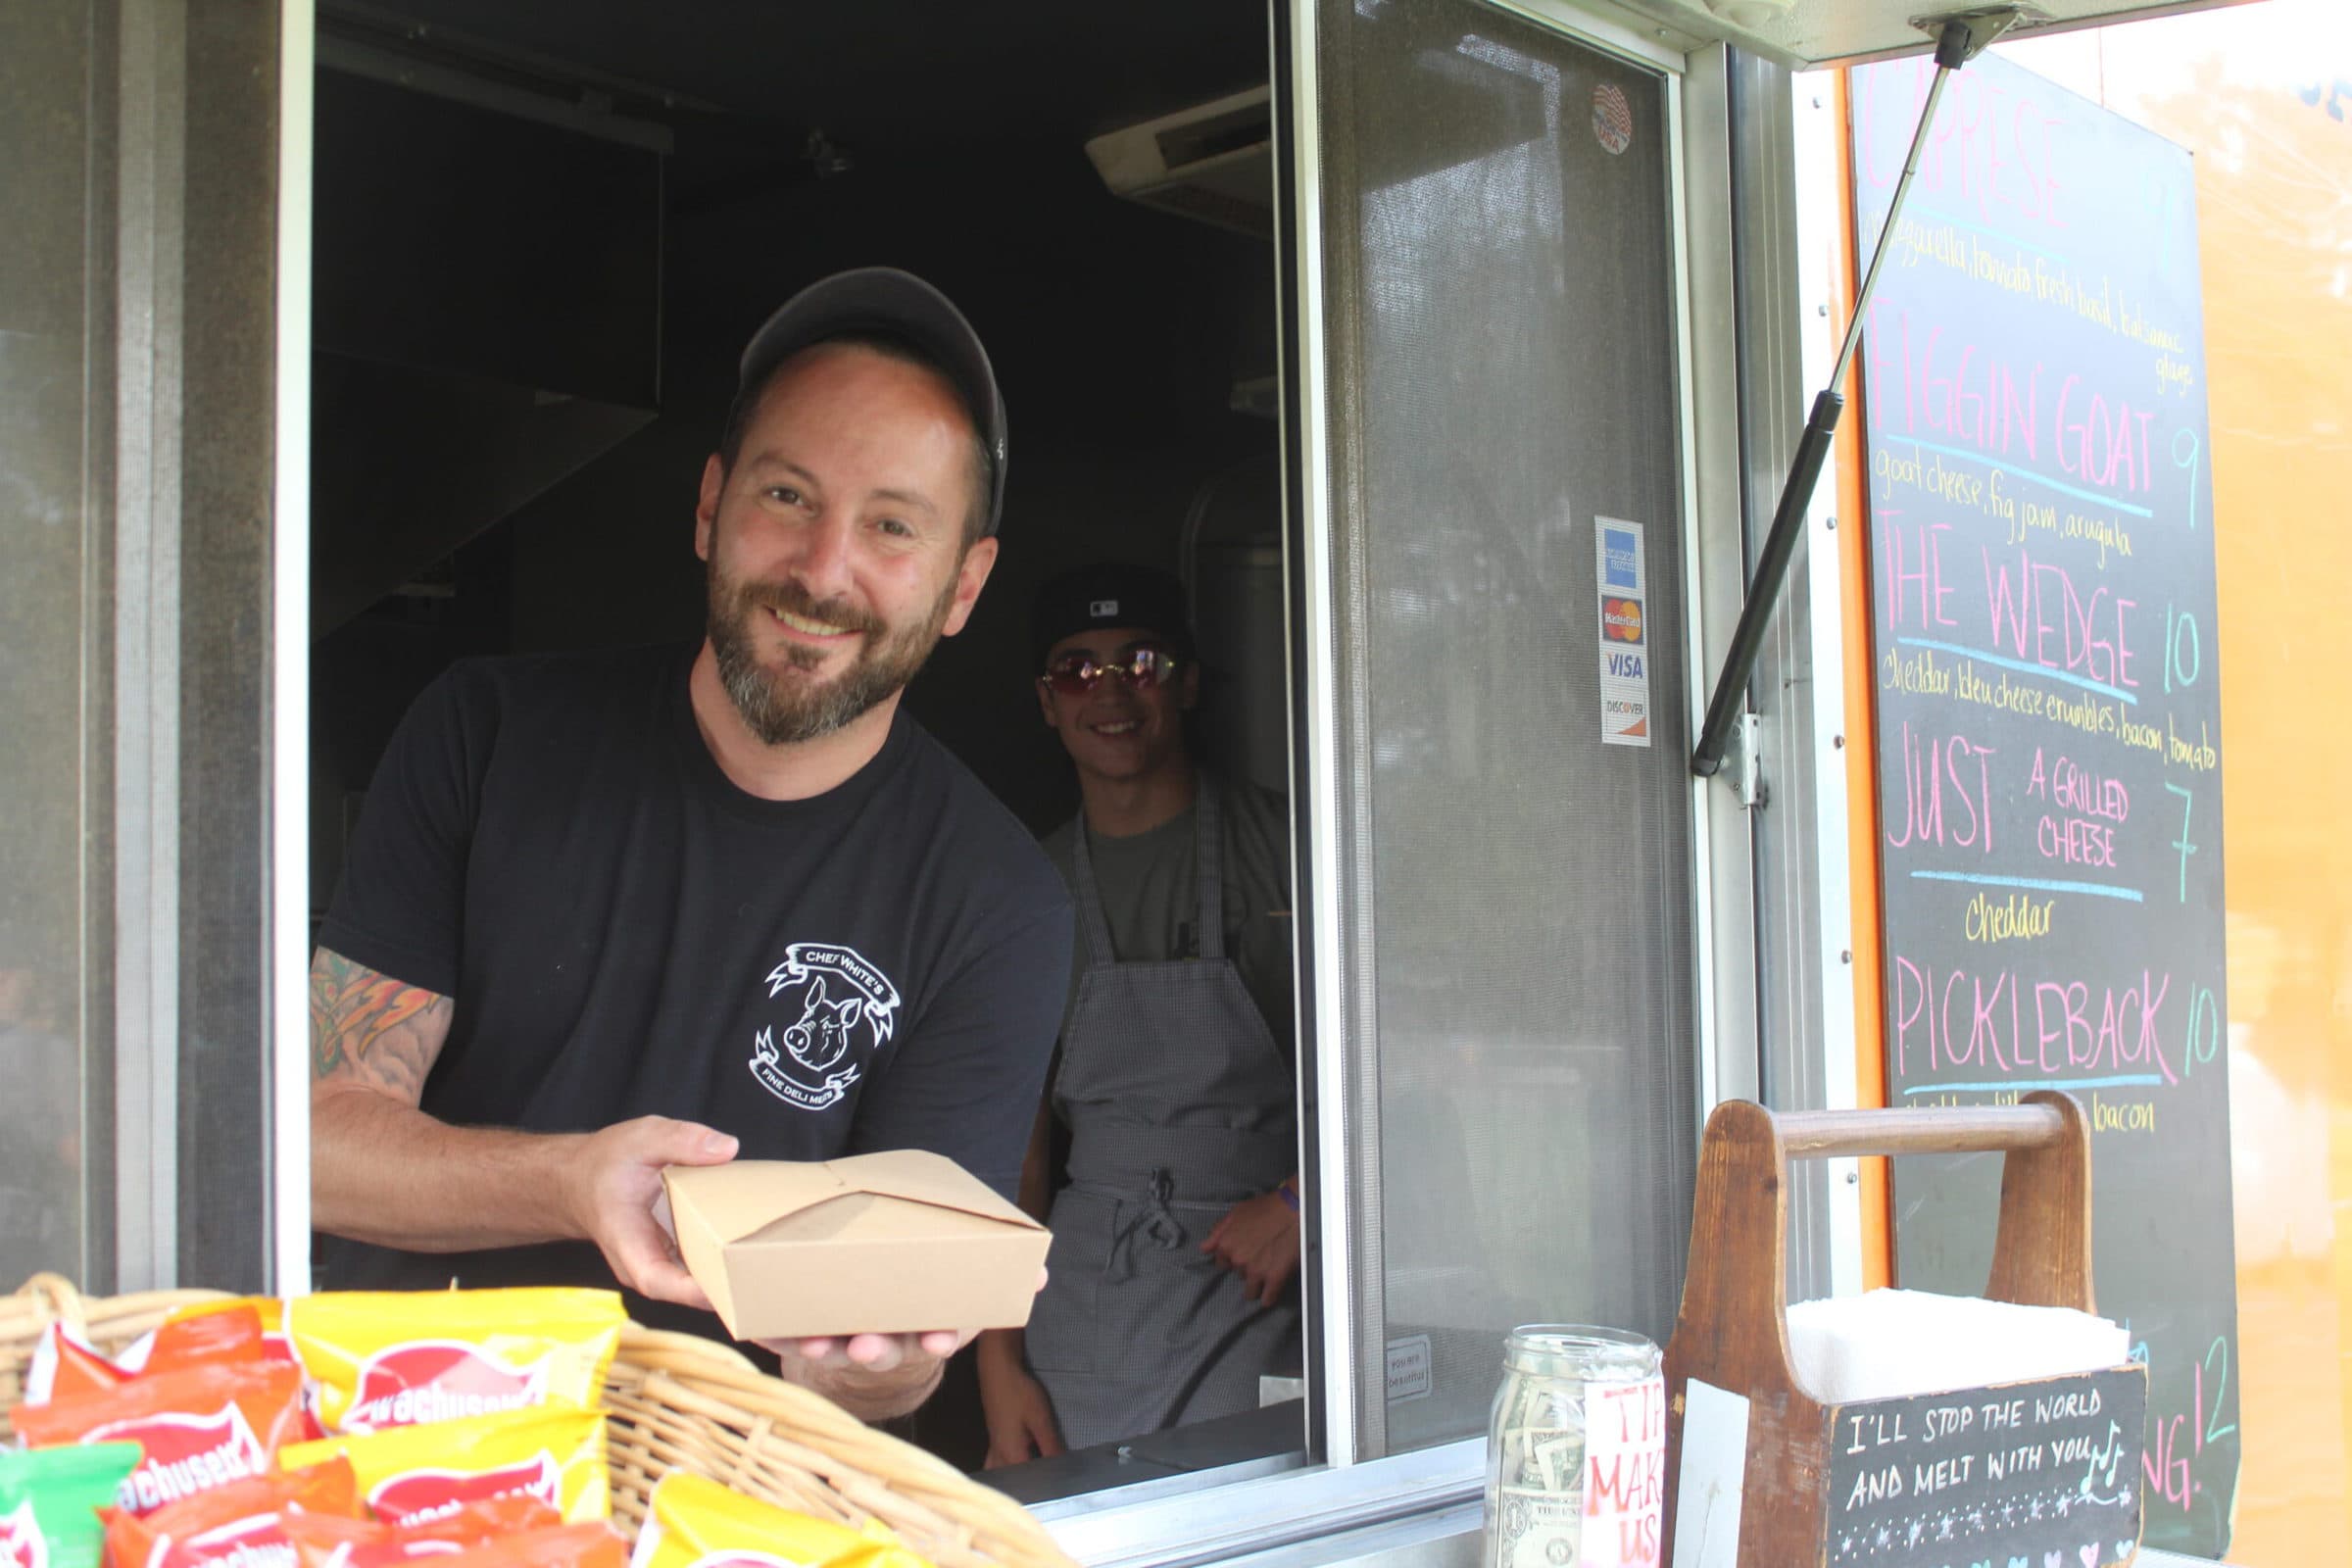 Joe, of Say Cheese! Food truck, hands a grilled cheese sandwich.